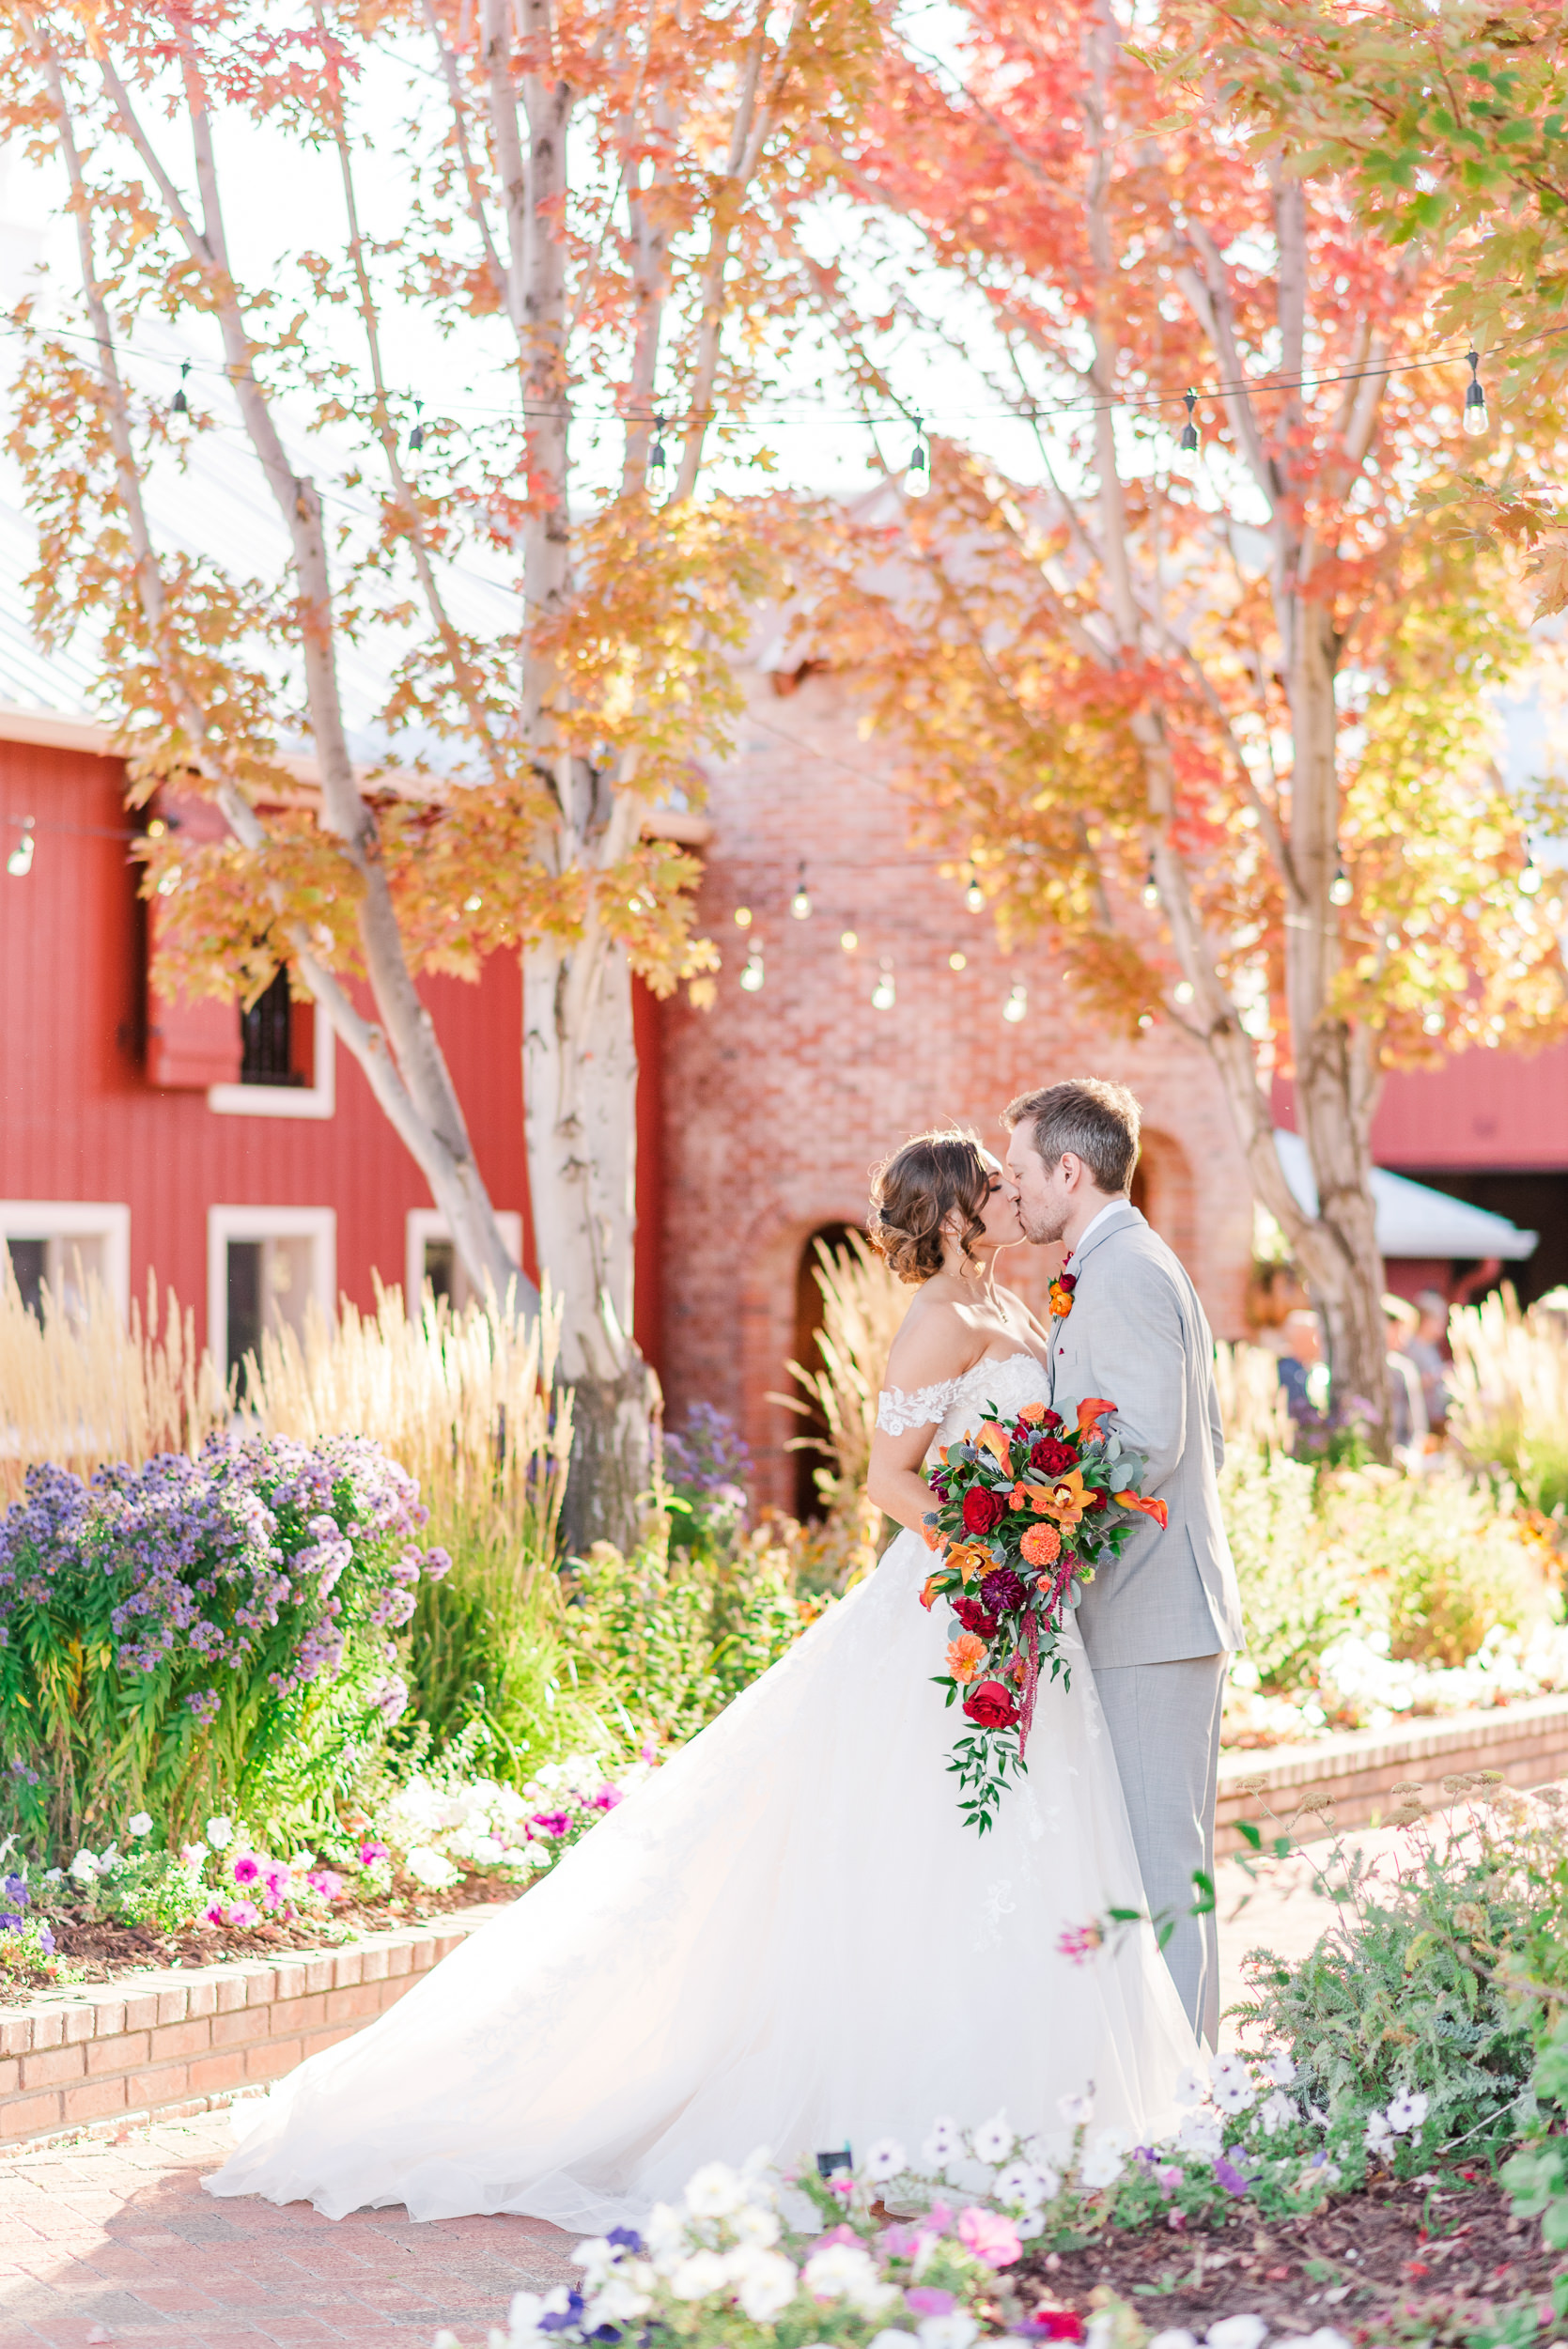 Bride and groom kiss in front of a red barn surrounded by trees with red and yellow leaves.